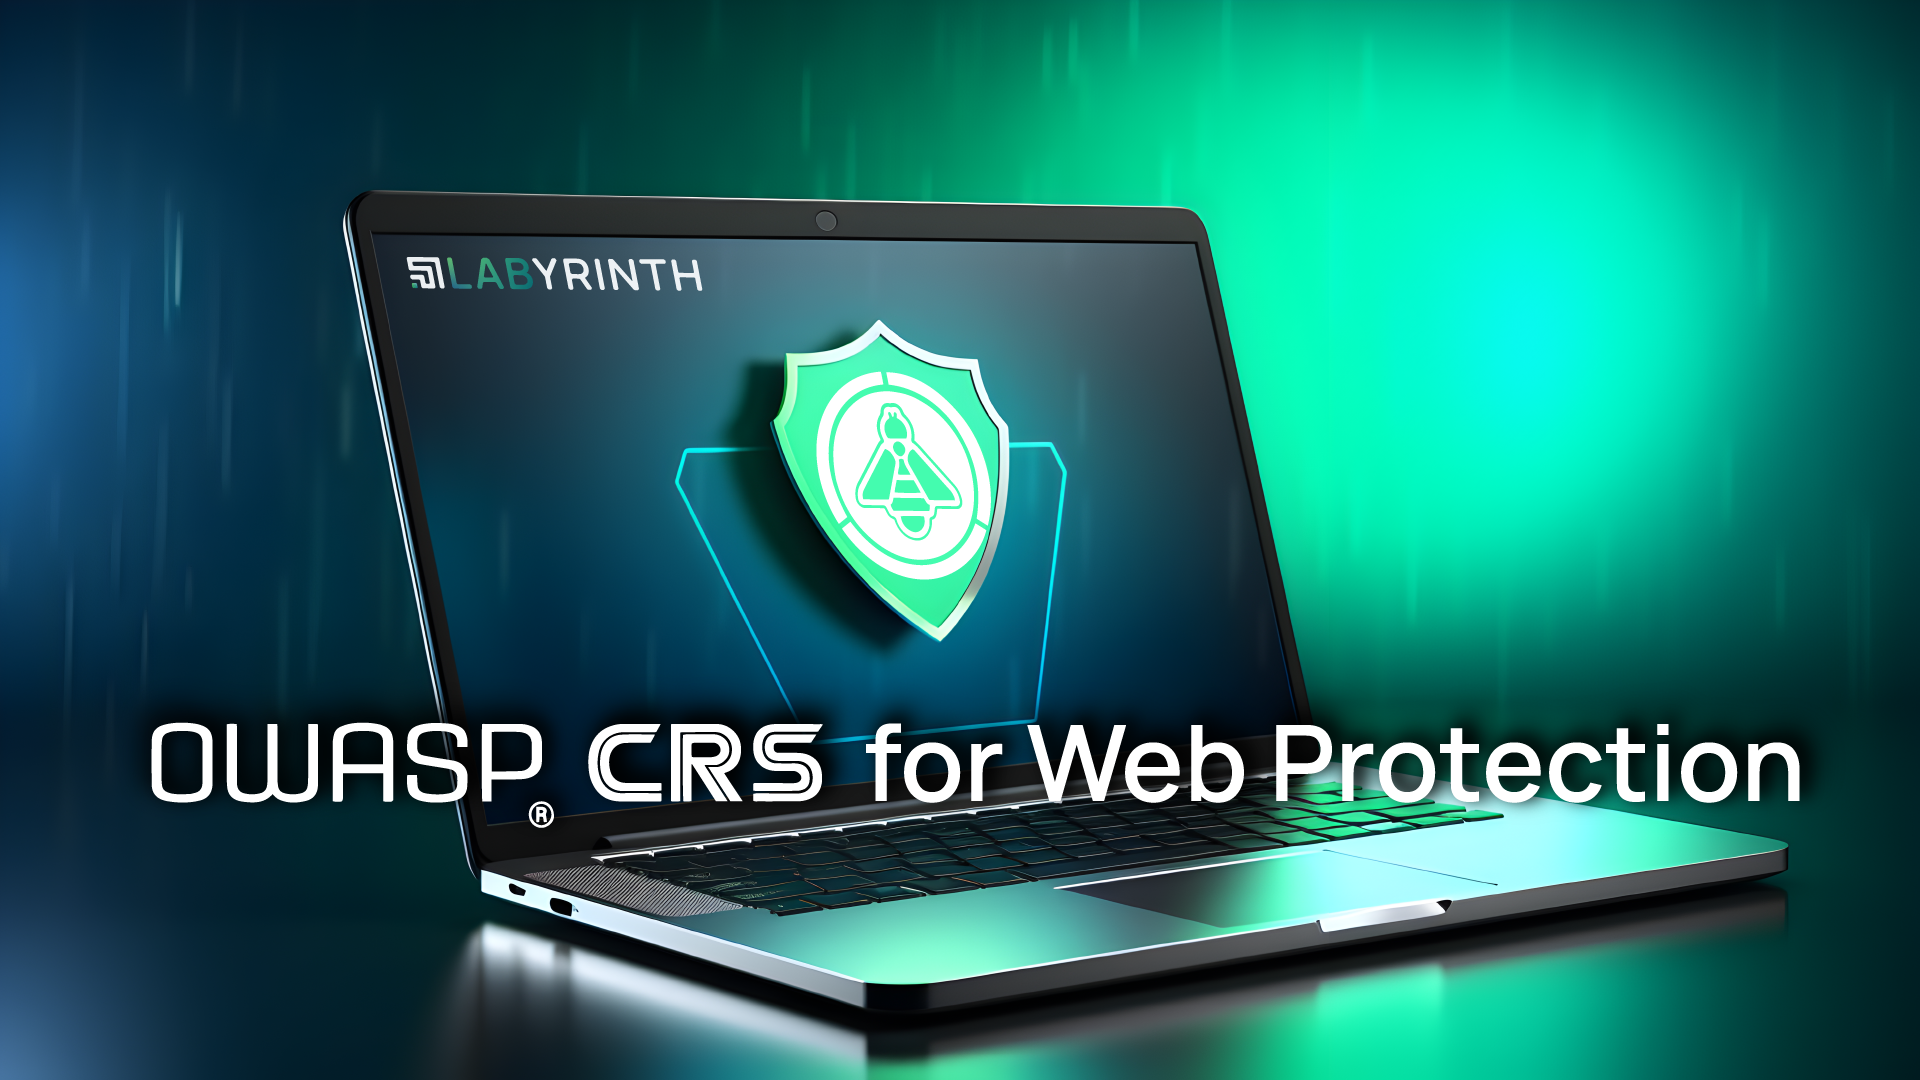 OWASP® CRS for Web Protection